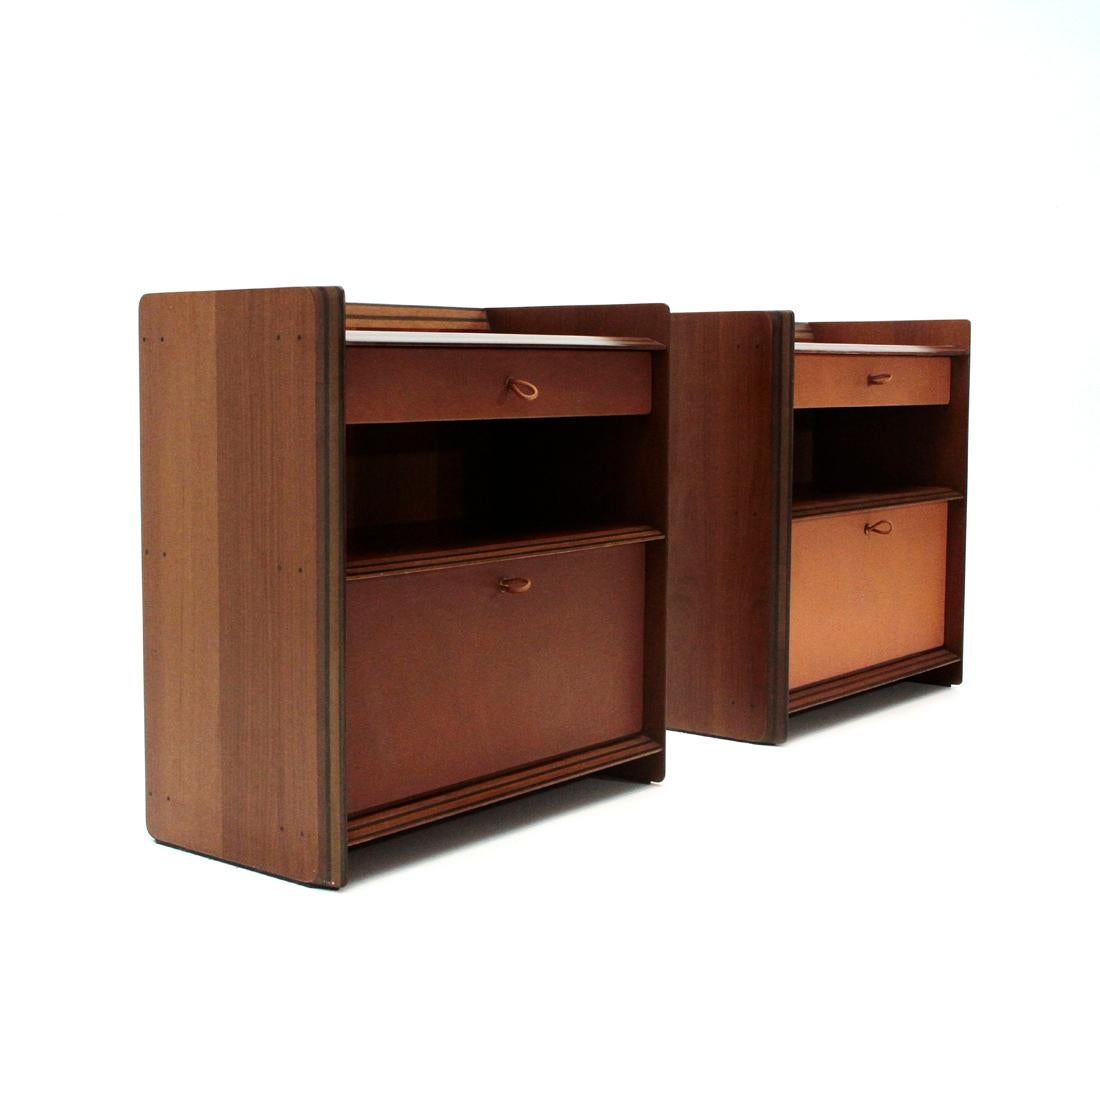 Bedside tables produced by Max Alto based on a project by the Afra and Tobia Scarpa architects in the 1970s.
Side back supports and shelves in laminated wood veneered with slats with rounded corners.
Front panels of the drawers covered in leather,